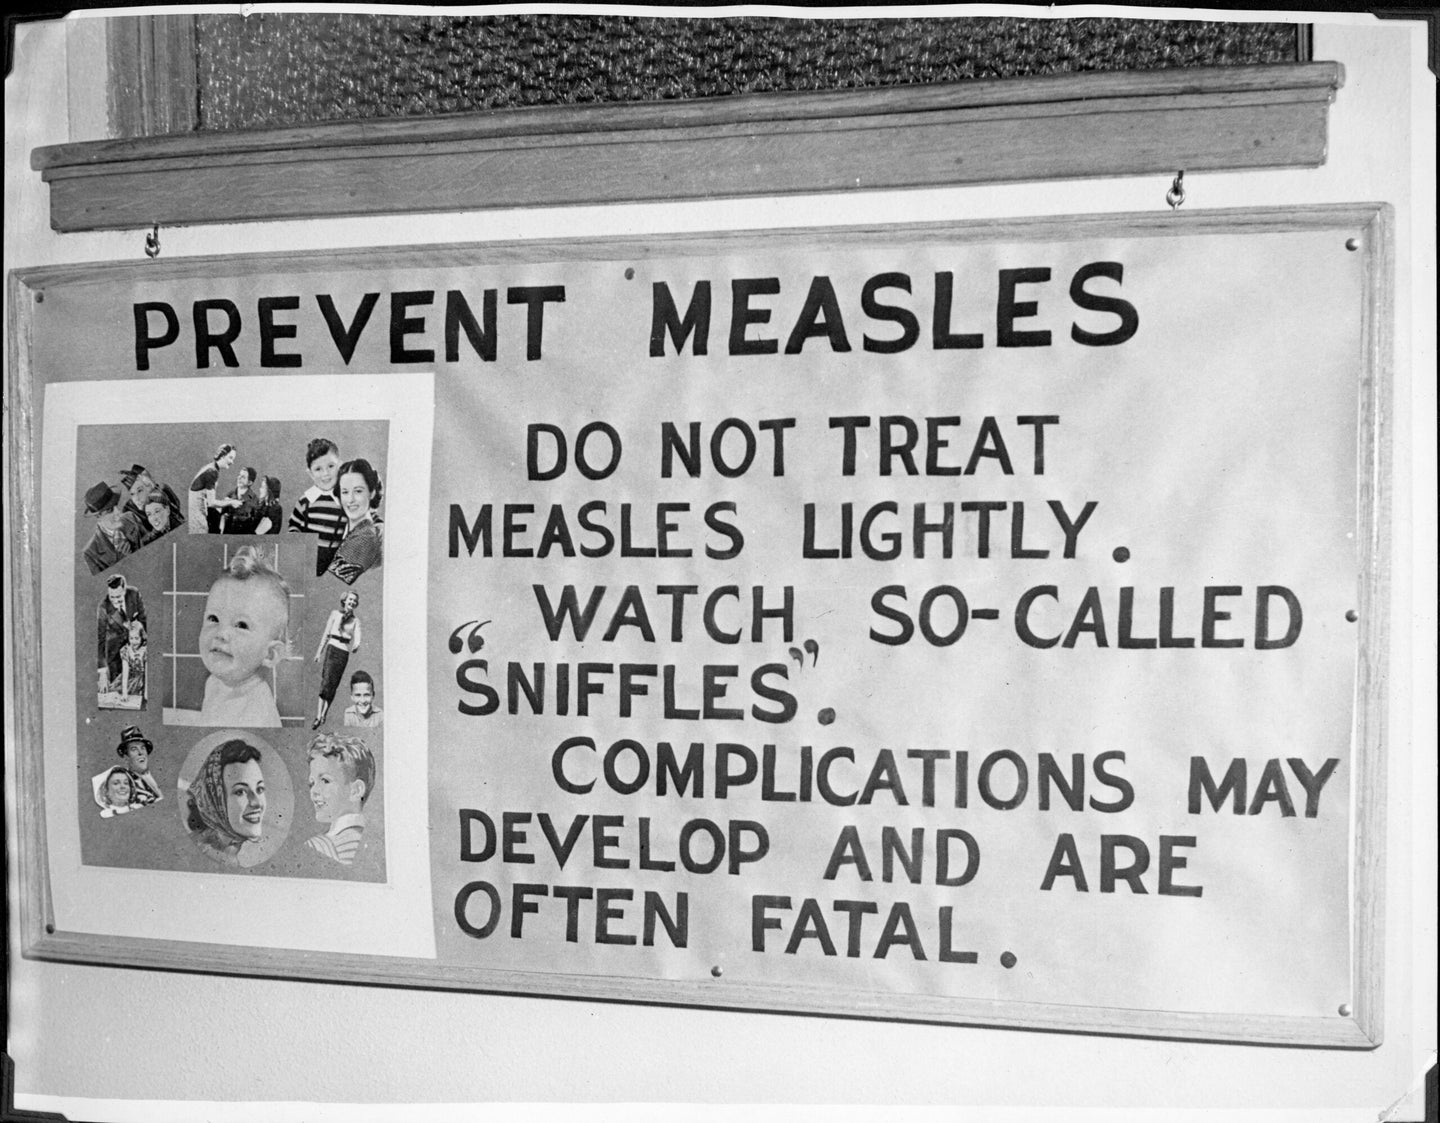 measles prevention poster complications